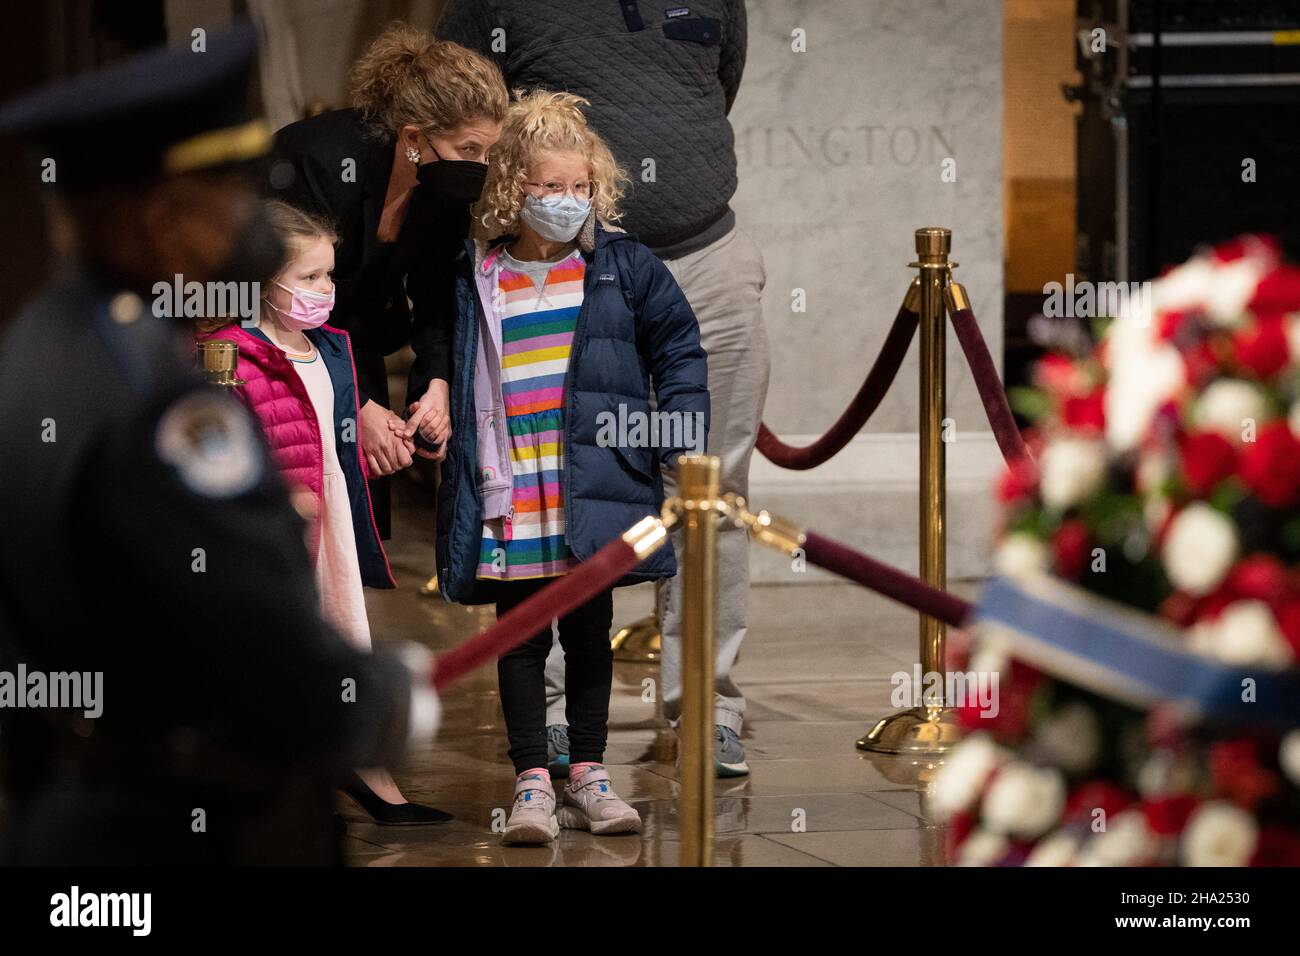 Guests pay their respects to former Senator Robert J. Dole (R-KS) as he lies in state at the Rotunda of the U.S. Capitol in Washington, DC, USA on Thursday, December 9, 2021. Photo by Sarahbeth Maney/Pool/ABACAPRESS.COM Stock Photo